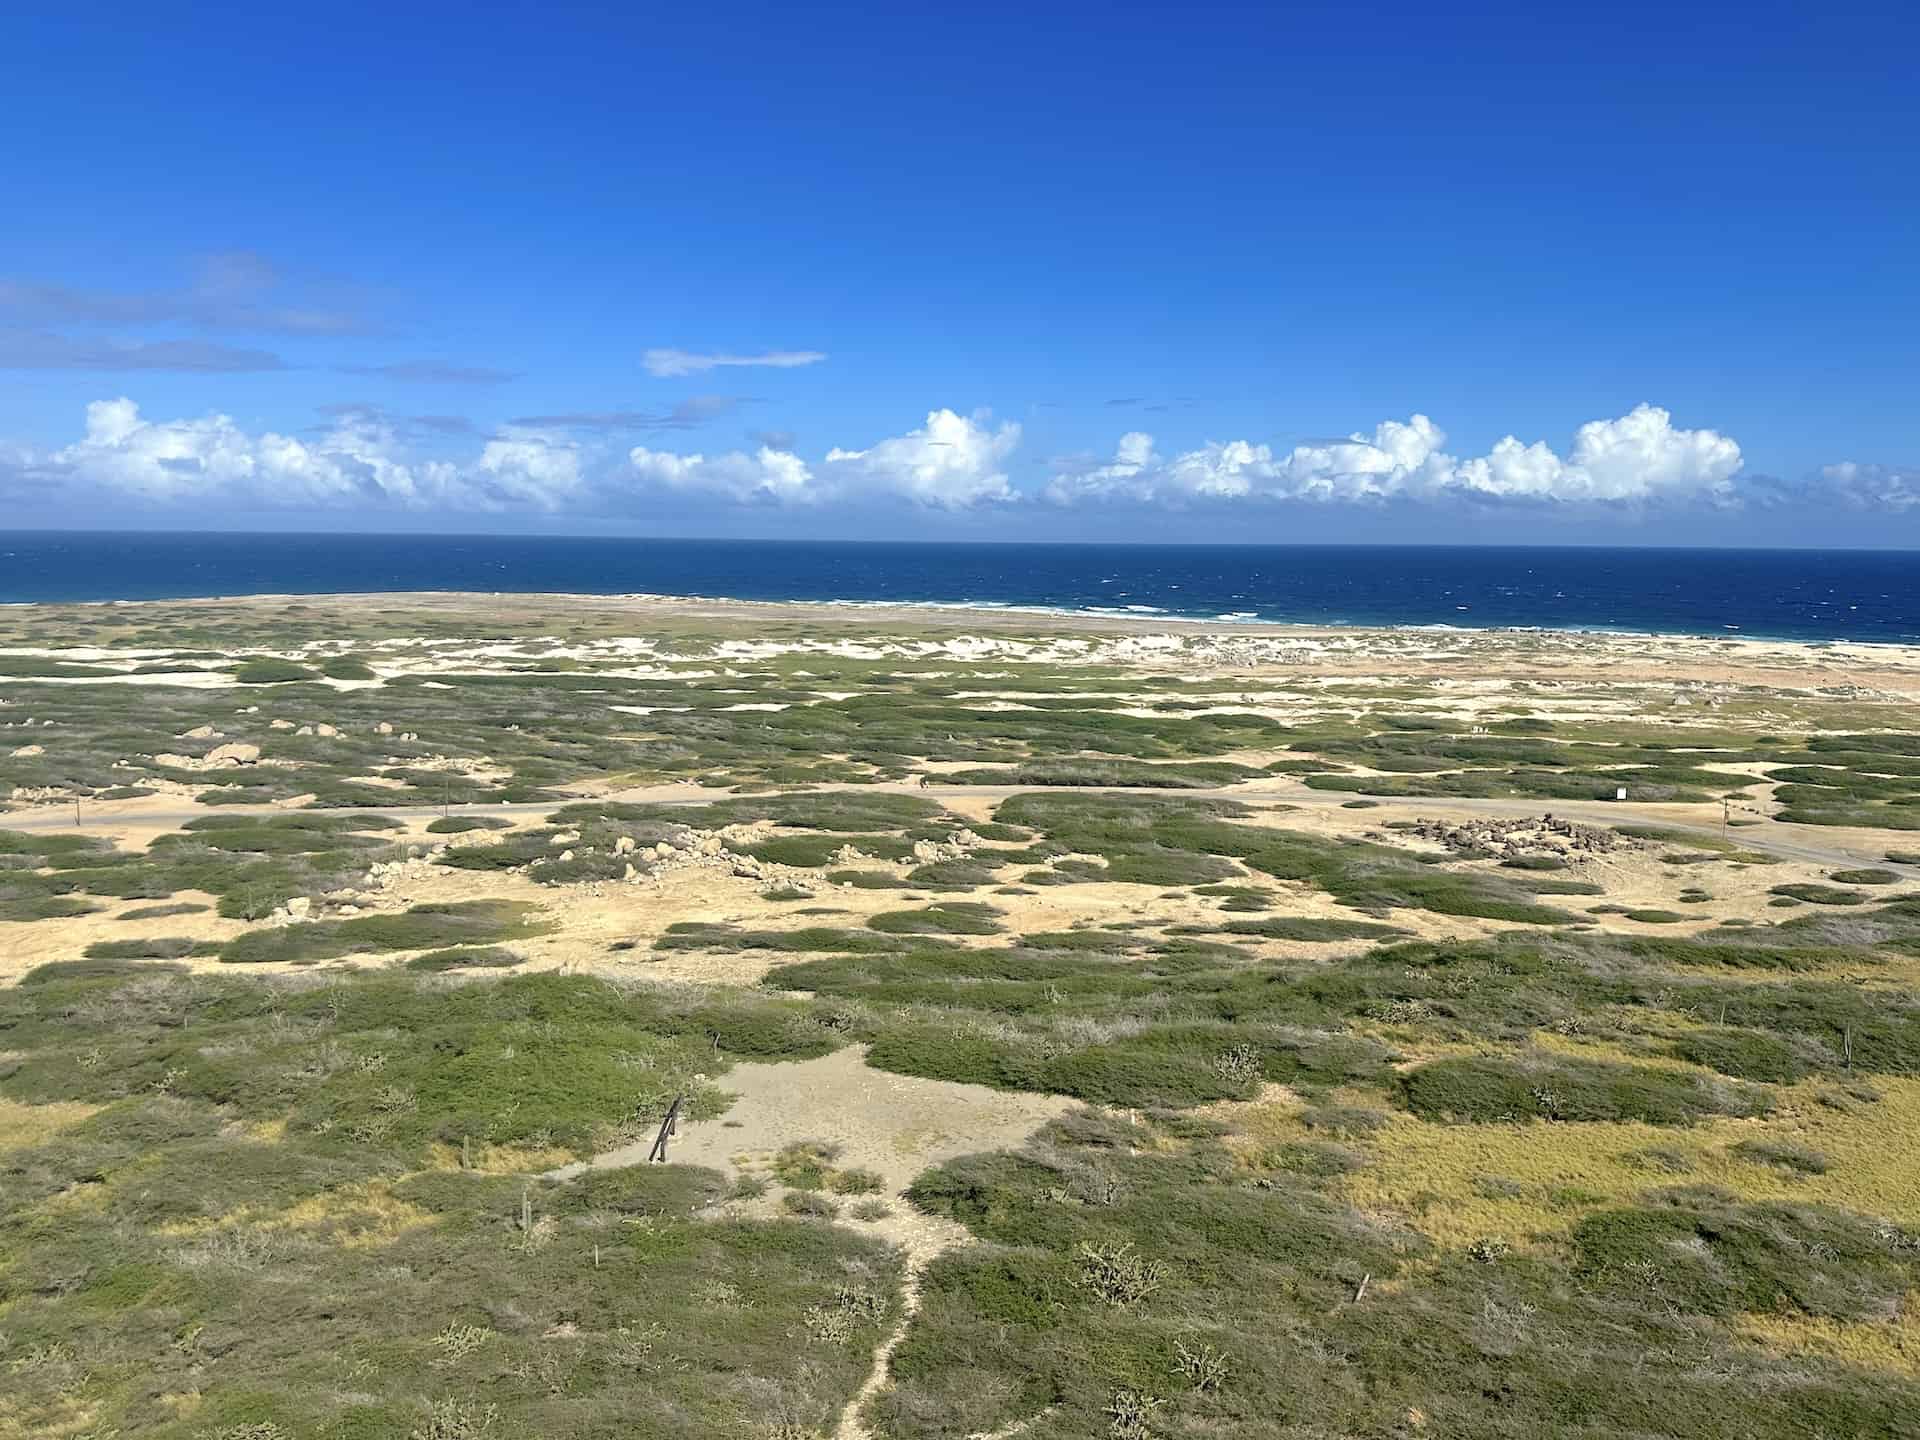 Sasarawichi Dunes and Westpunt from the California Lighthouse in Noord, Aruba